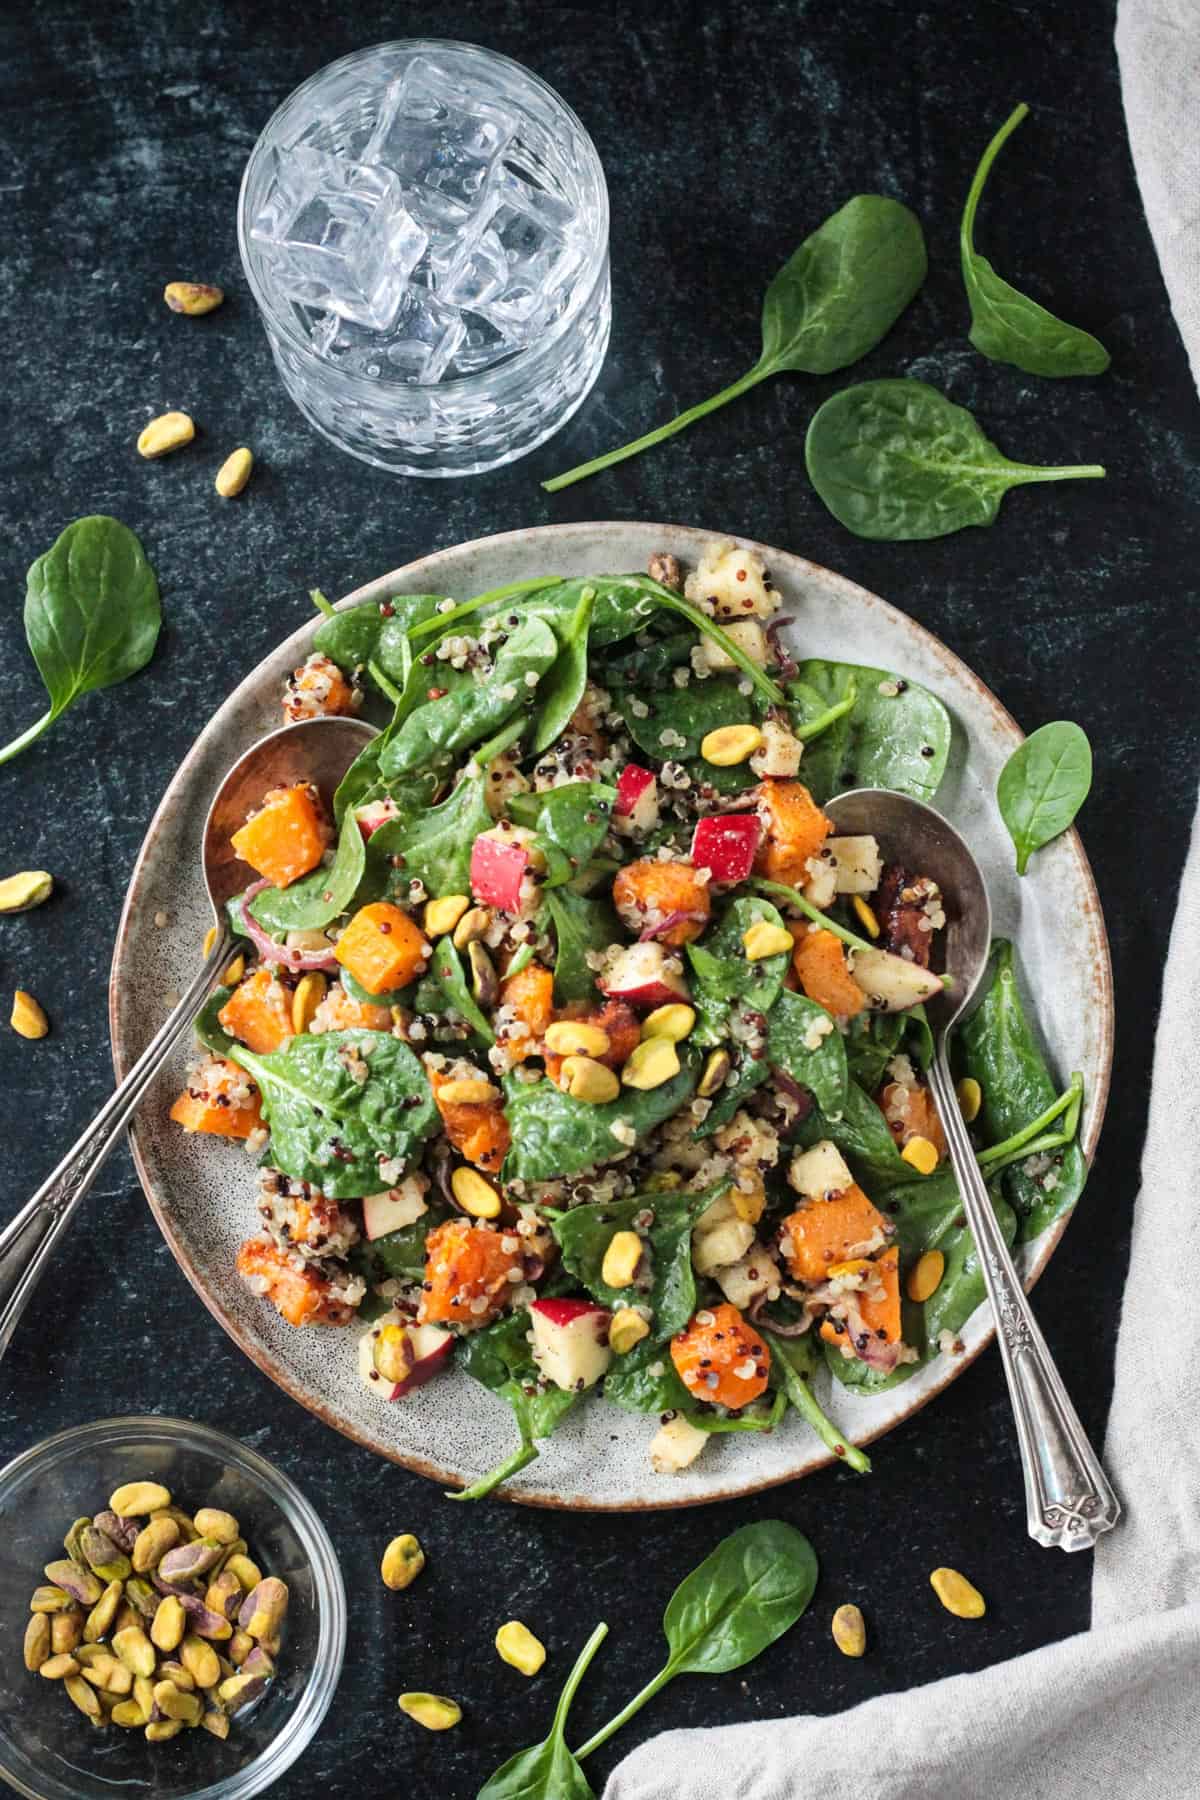 Butternut squash quinoa salad with spinach and chopped apples.